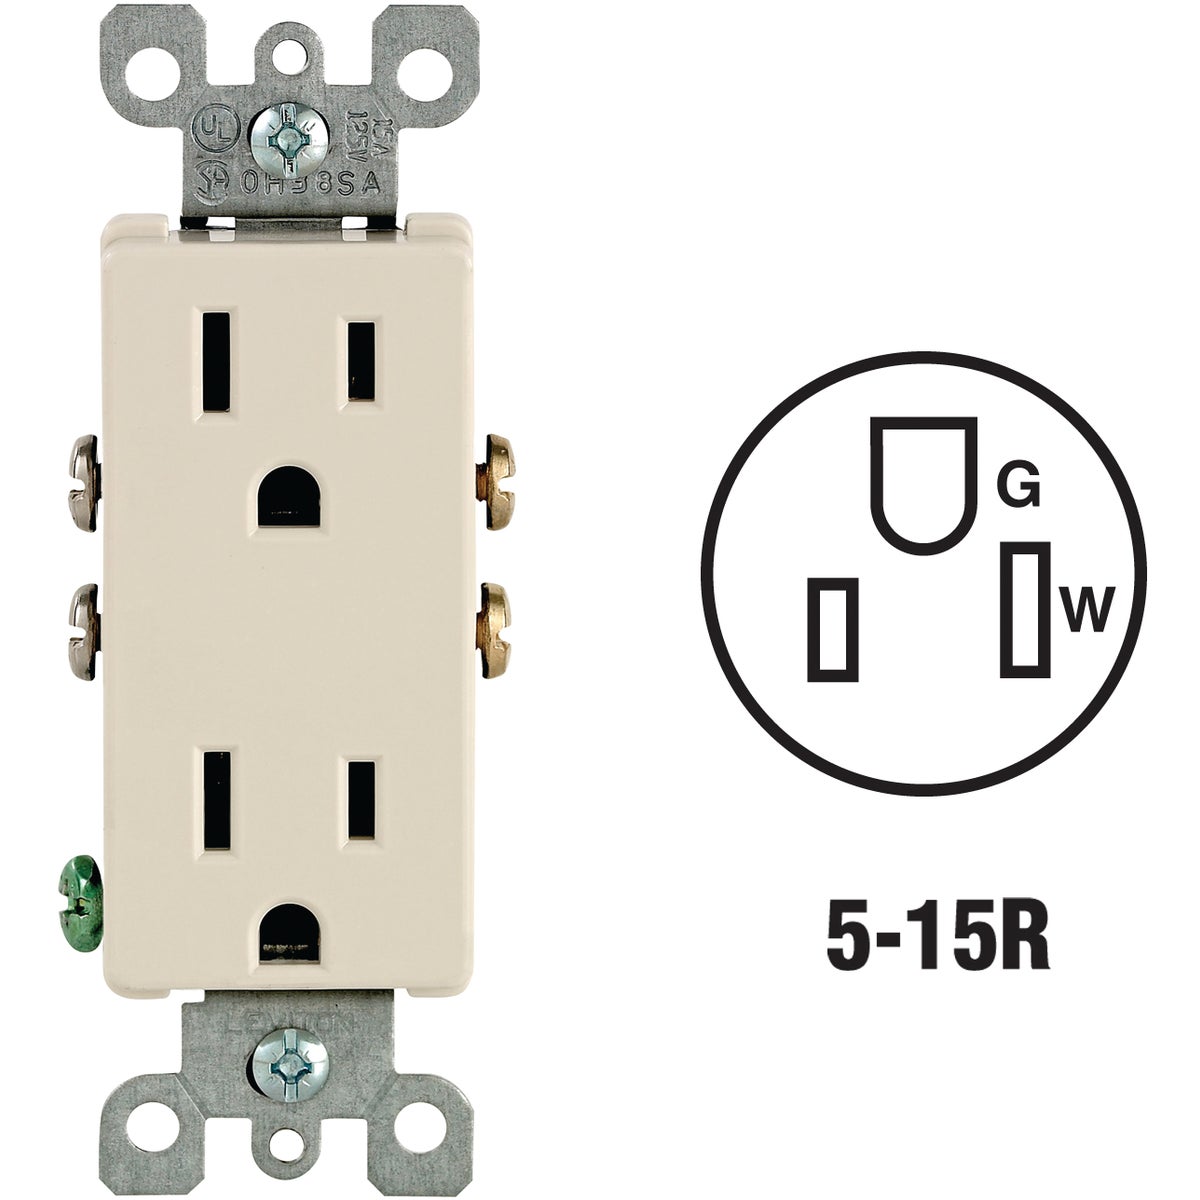 Item 515918, Decora duplex outlet, side wire and Quickwire push-in wiring options.